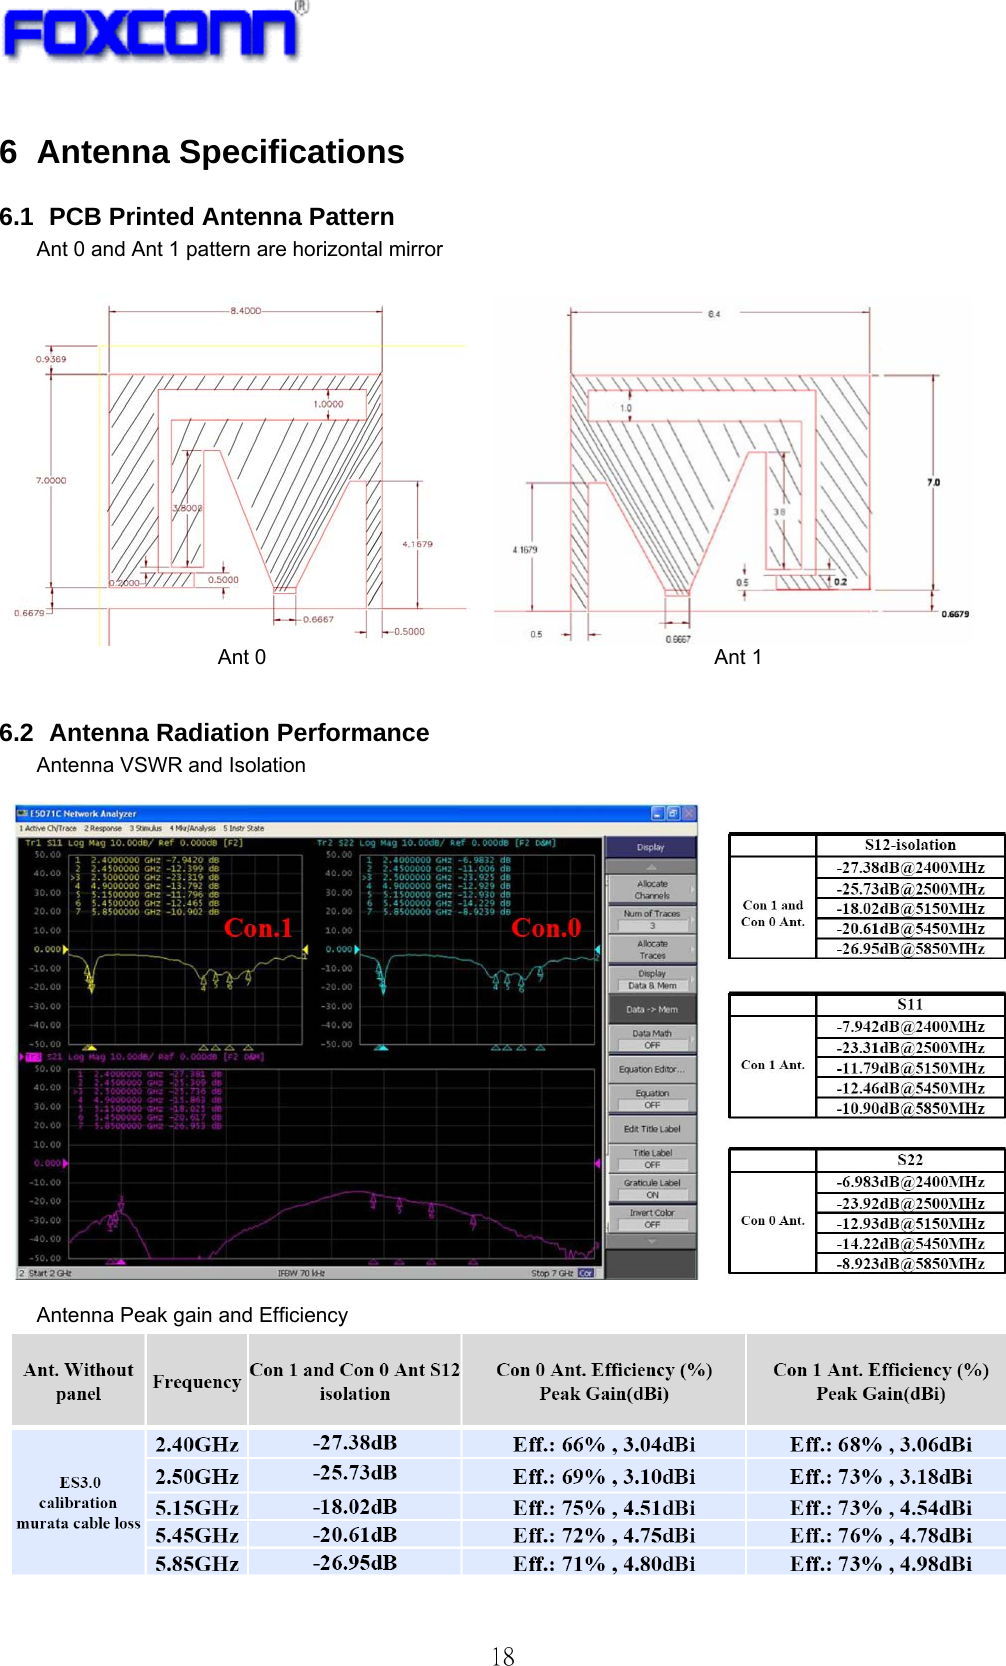   18 6 Antenna Specifications 6.1   PCB Printed Antenna Pattern Ant 0 and Ant 1 pattern are horizontal mirror                             Ant 0                                           Ant 1  6.2   Antenna  Radiation  Performance Antenna VSWR and Isolation    Antenna Peak gain and Efficiency   